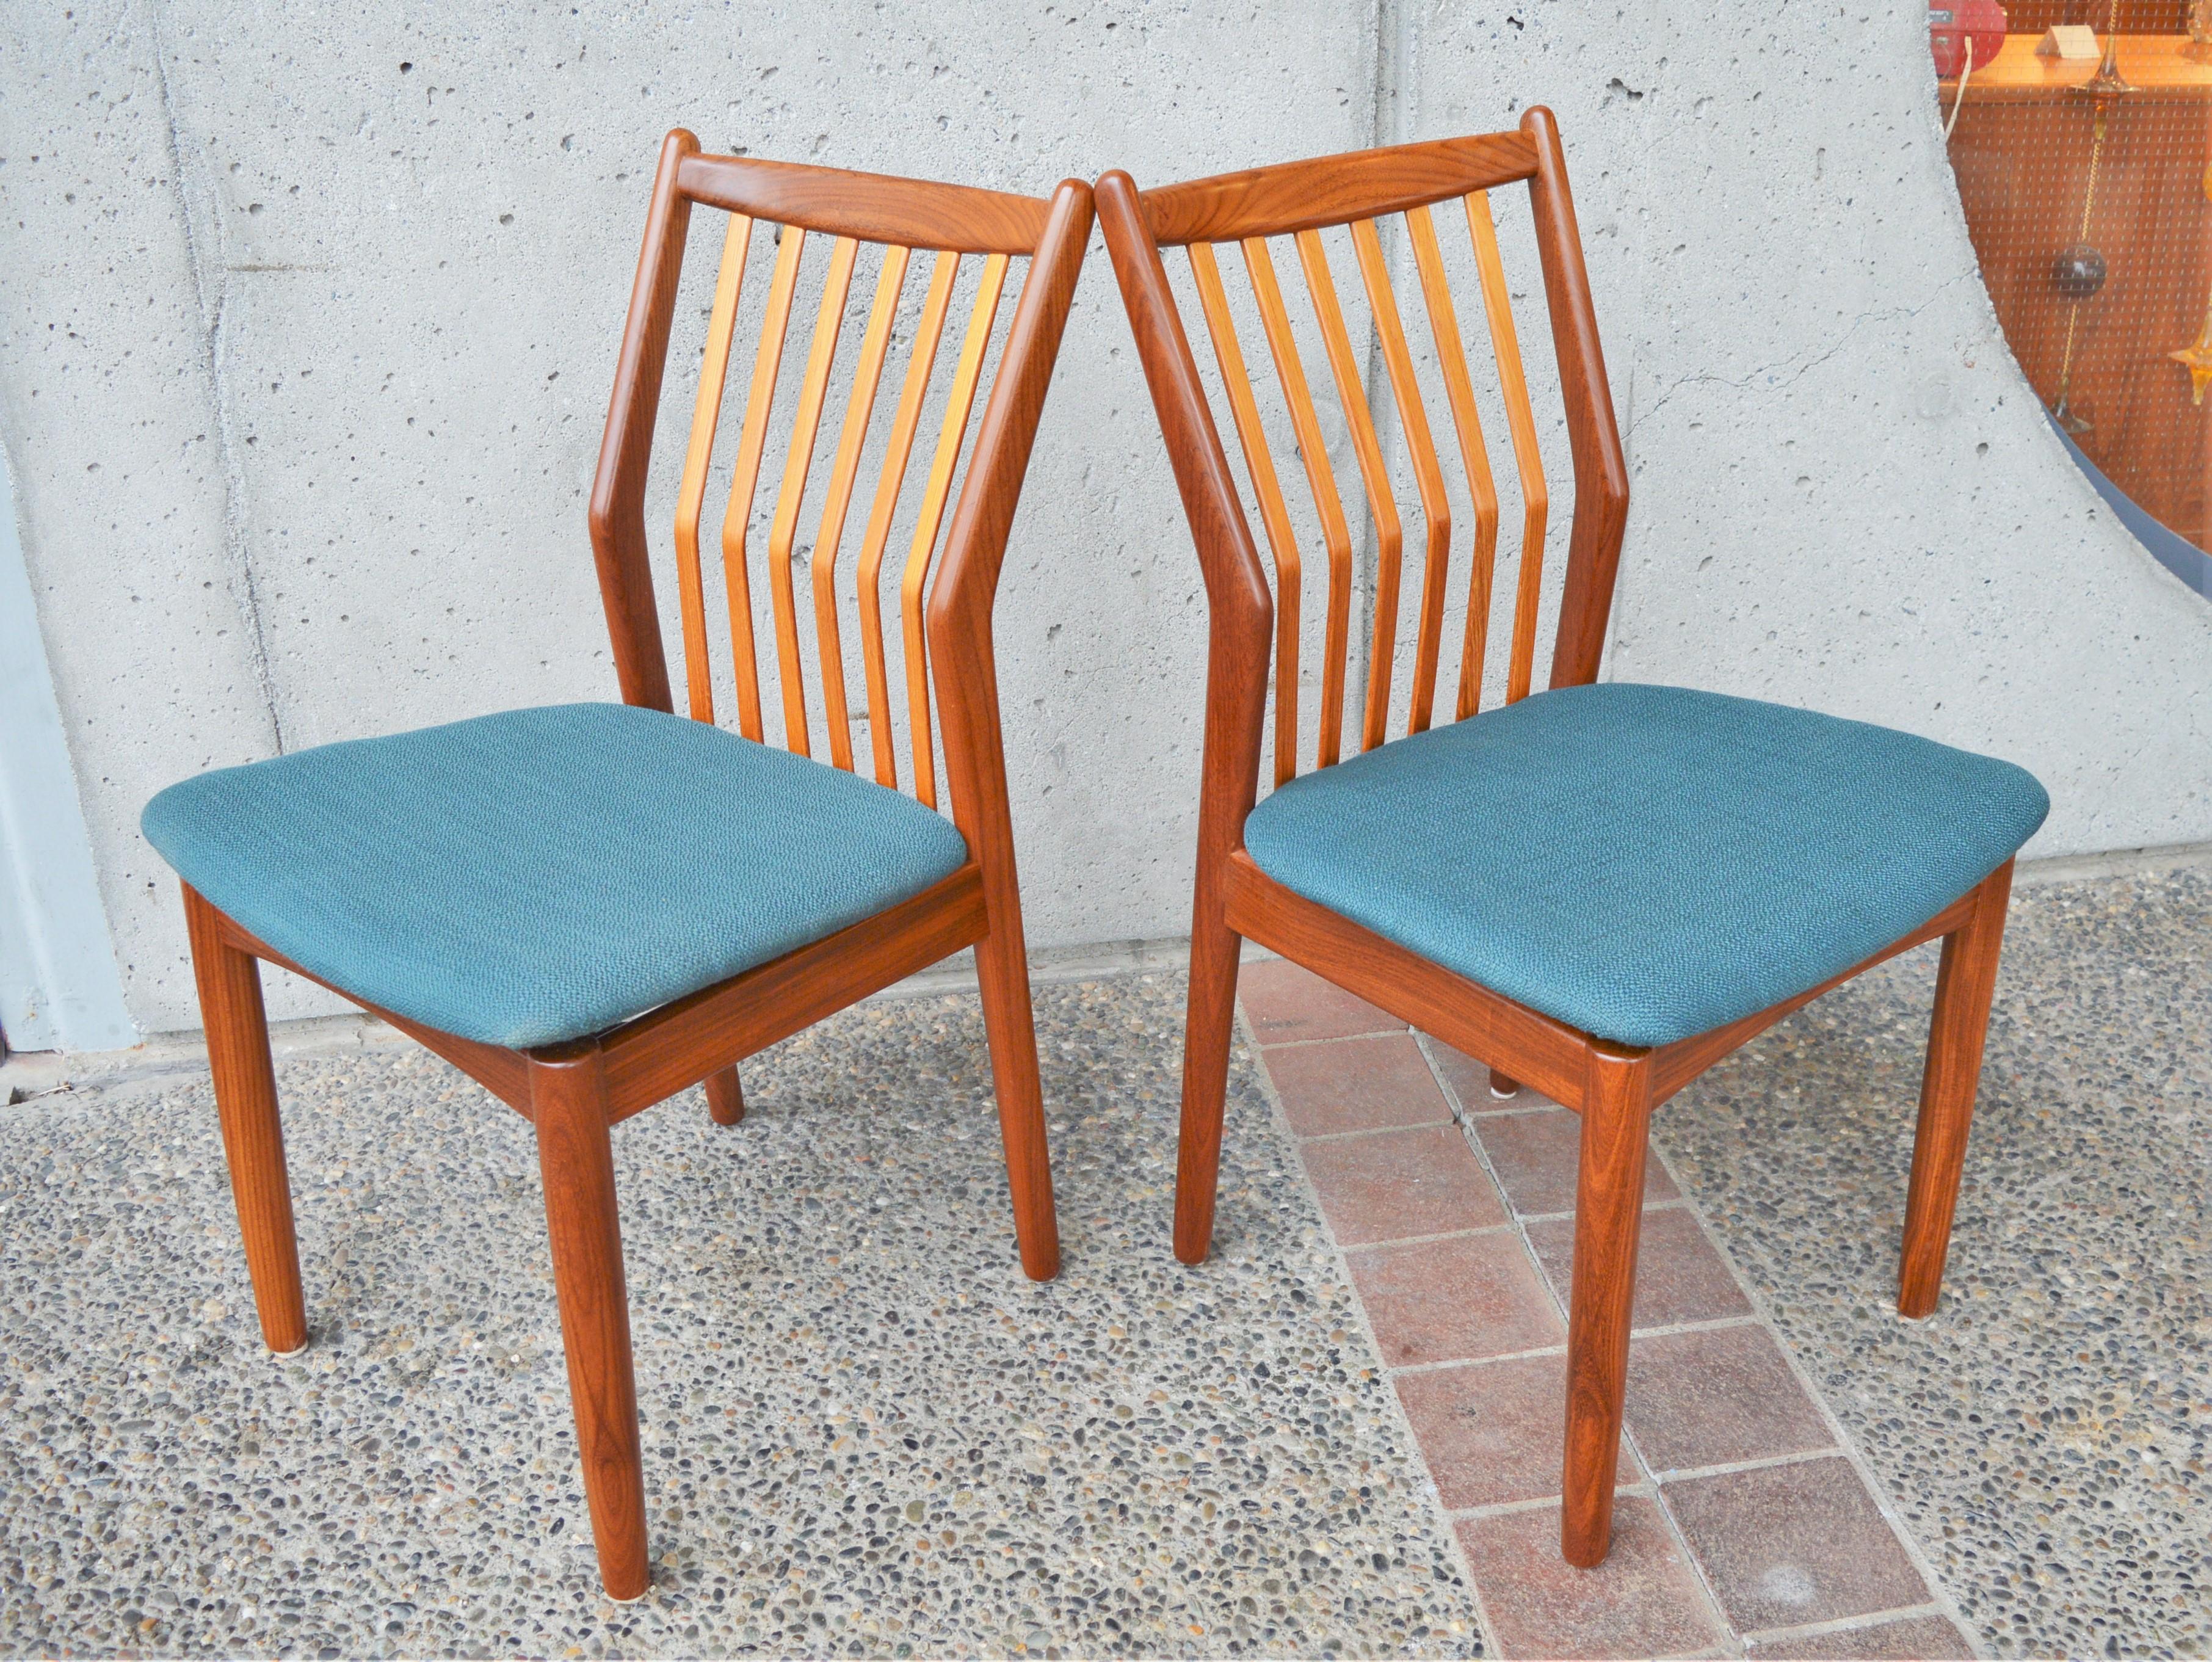 This striking set of 4-Svend Madsen dining chairs are a rare, little seen model from the 1950s, with the top bar of the backrest capping the back slats, rather than the more common curved tops. Featuring unique backrests where the side braces and